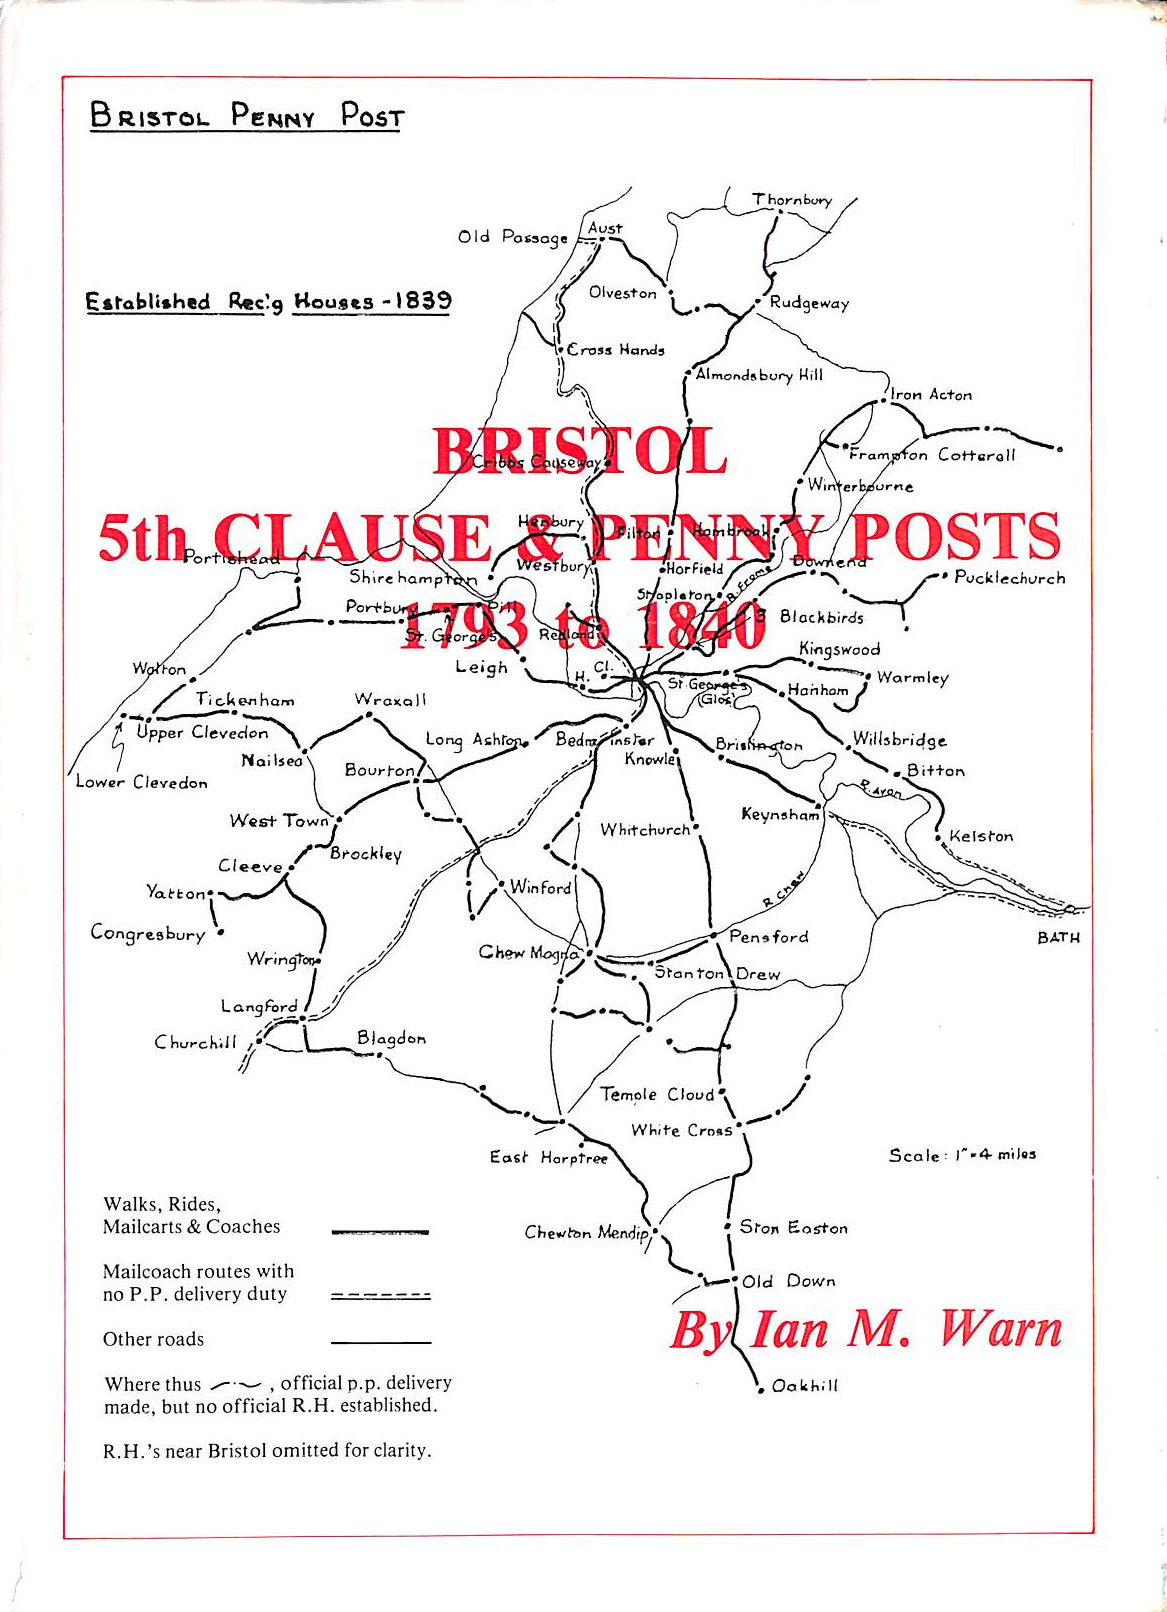 I M WARN - Bristol 5th Clause & Penny Posts 1793 to 1840